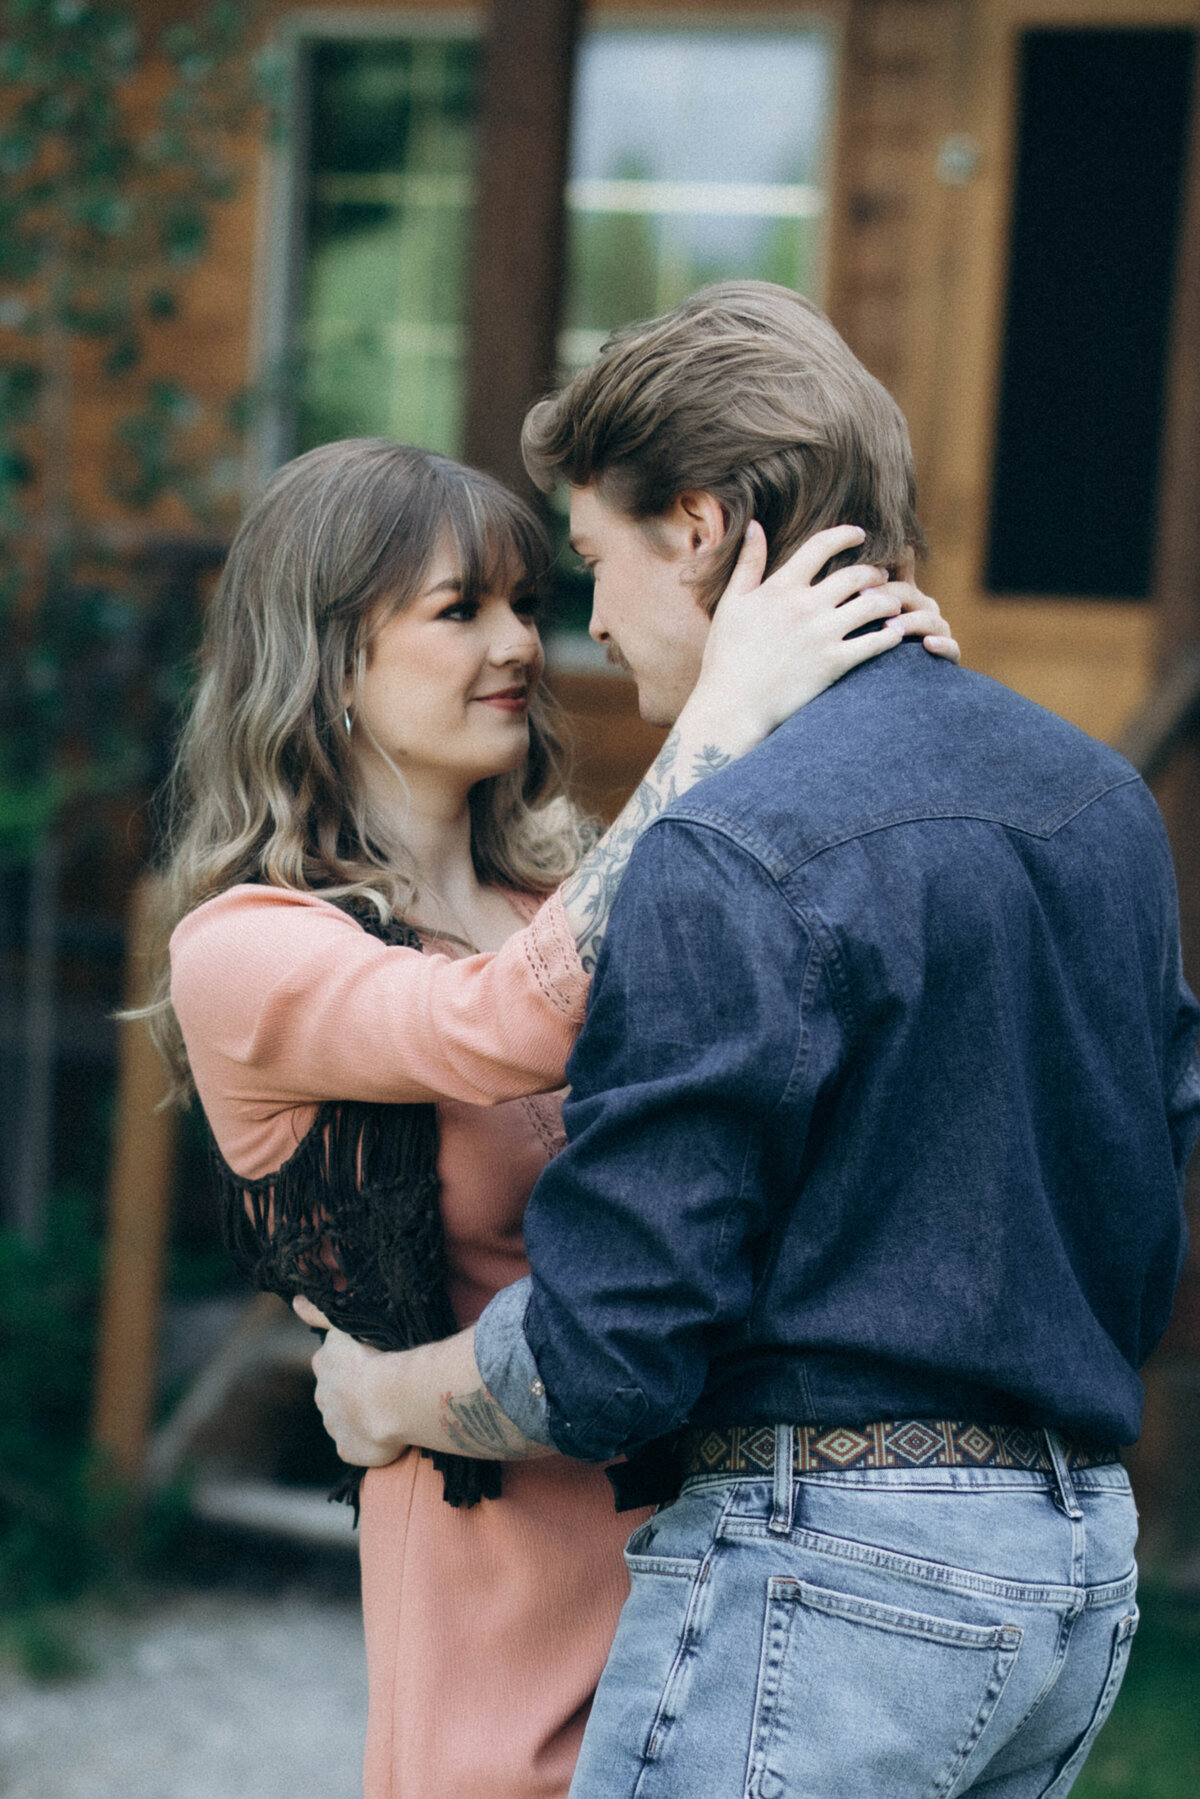 vpc-couples-vintage-cabin-shoot-12